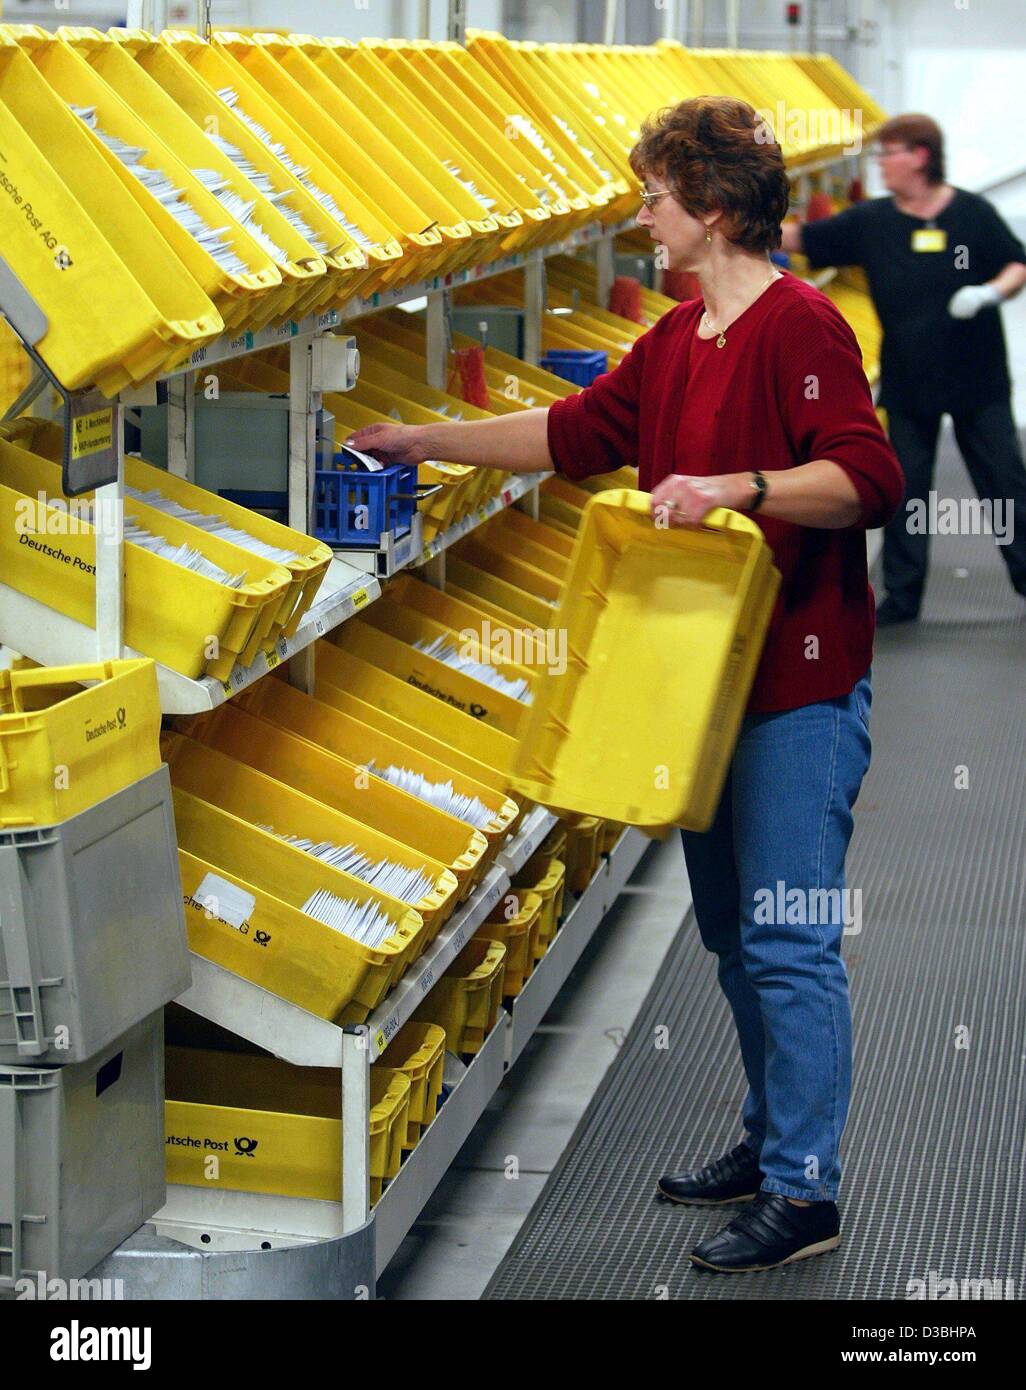 (dpa) - Two employees of the Deutsche Post AG sort letters at the letter center in Duesseldorf, Germany, 27 January 2003. The company has 83 national letter centers and an international post center. Daily about 72 million letters are sorted and mailed. Stock Photo